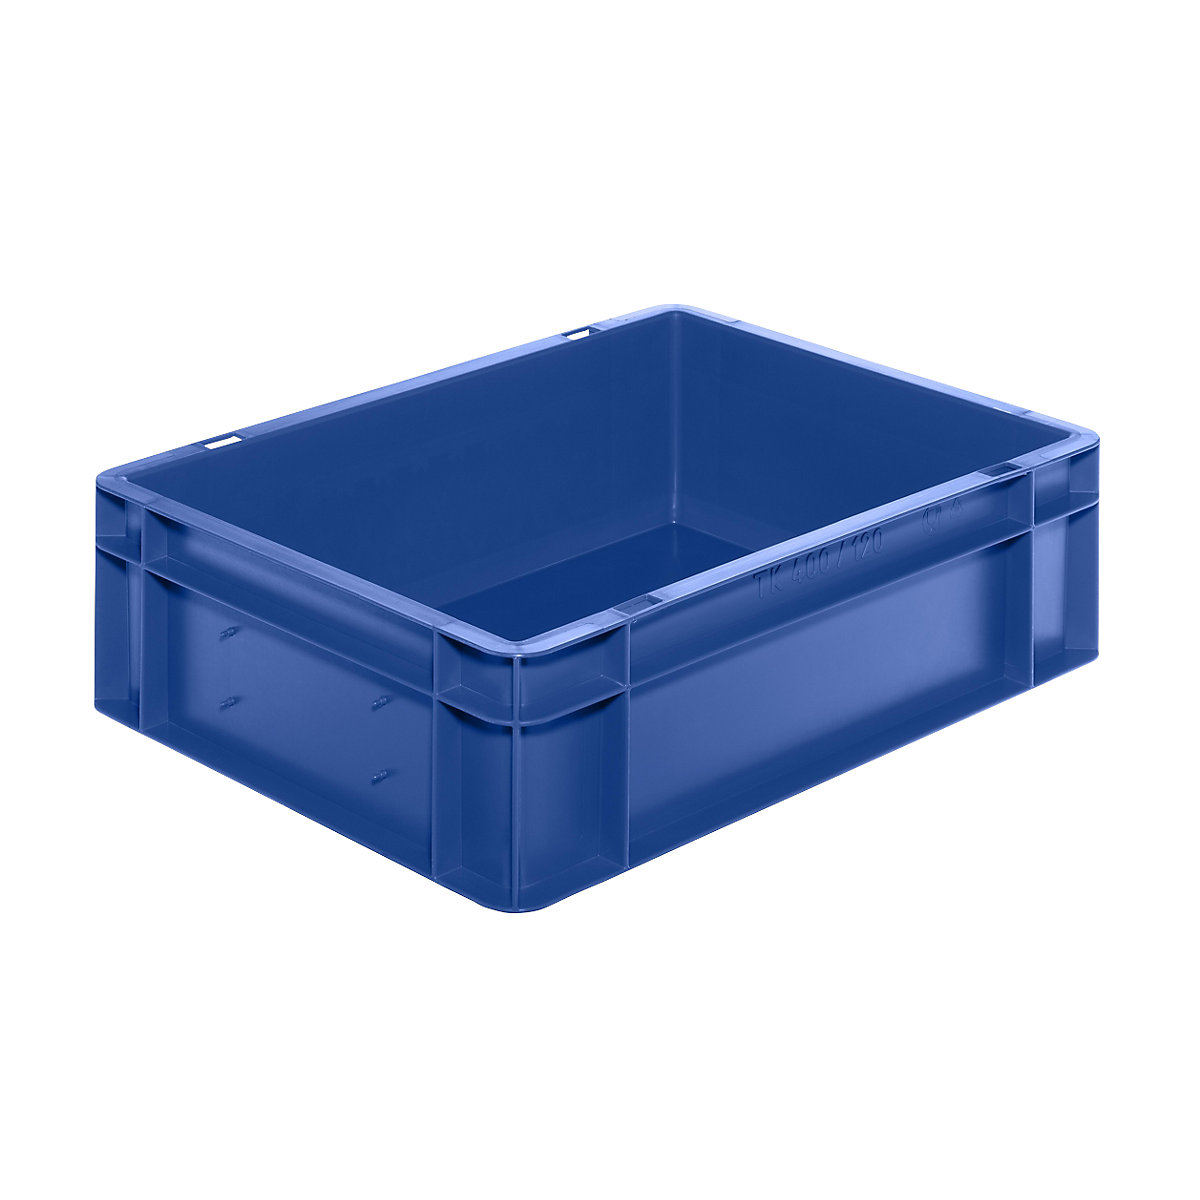 Euro stacking container, closed walls and base, LxWxH 400 x 300 x 120 mm, blue, pack of 5